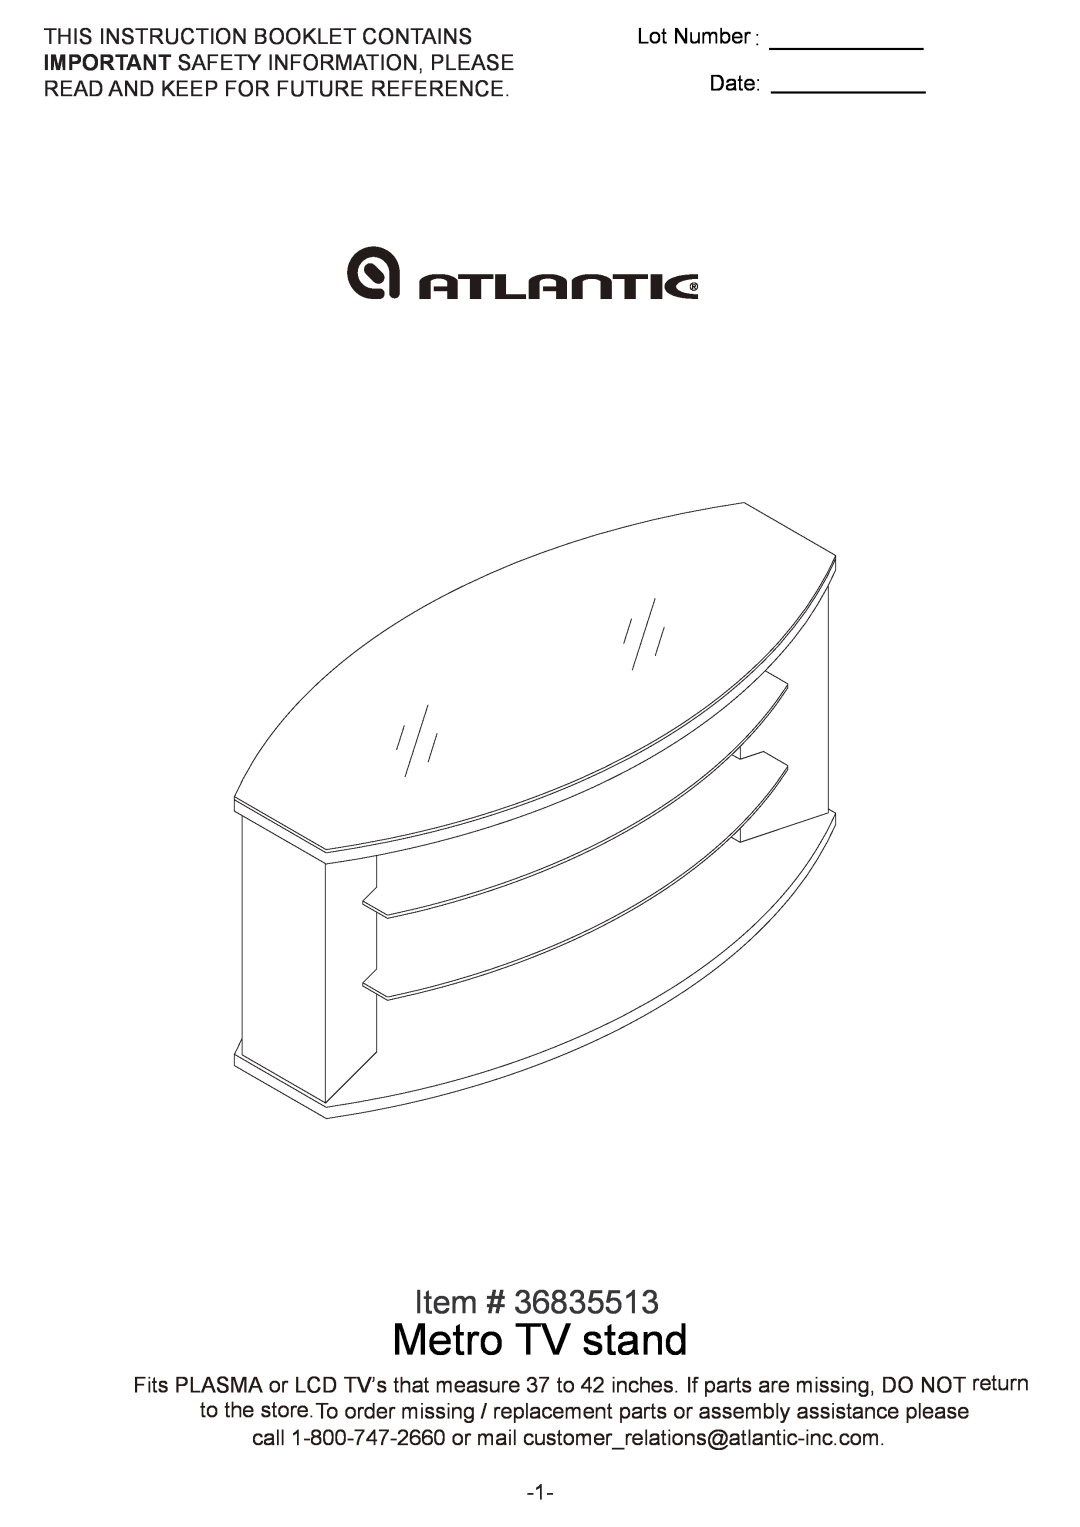 Atlantic 36835513 manual Metro TV stand, Item #, This Instruction Booklet Contains, Lot Number, Date 